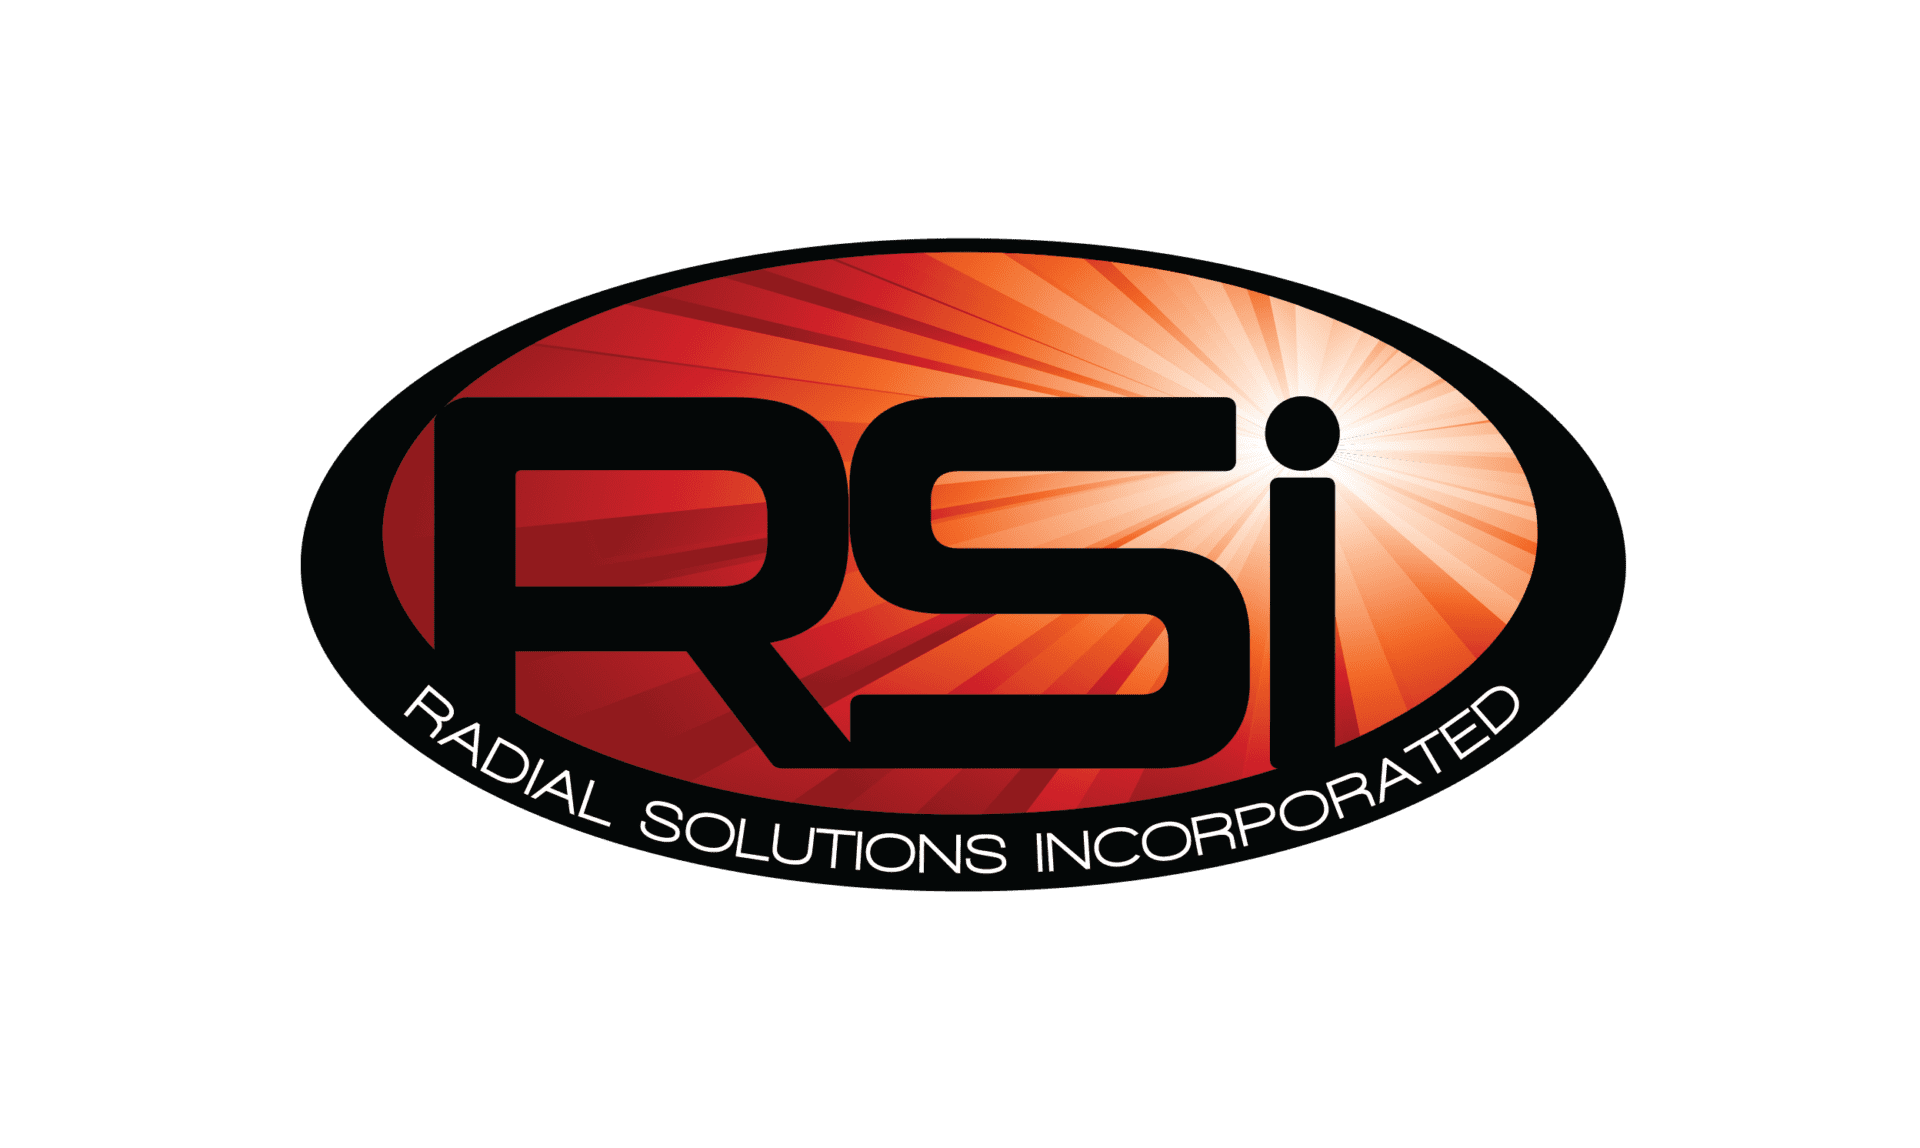 Radial Solutions Inc